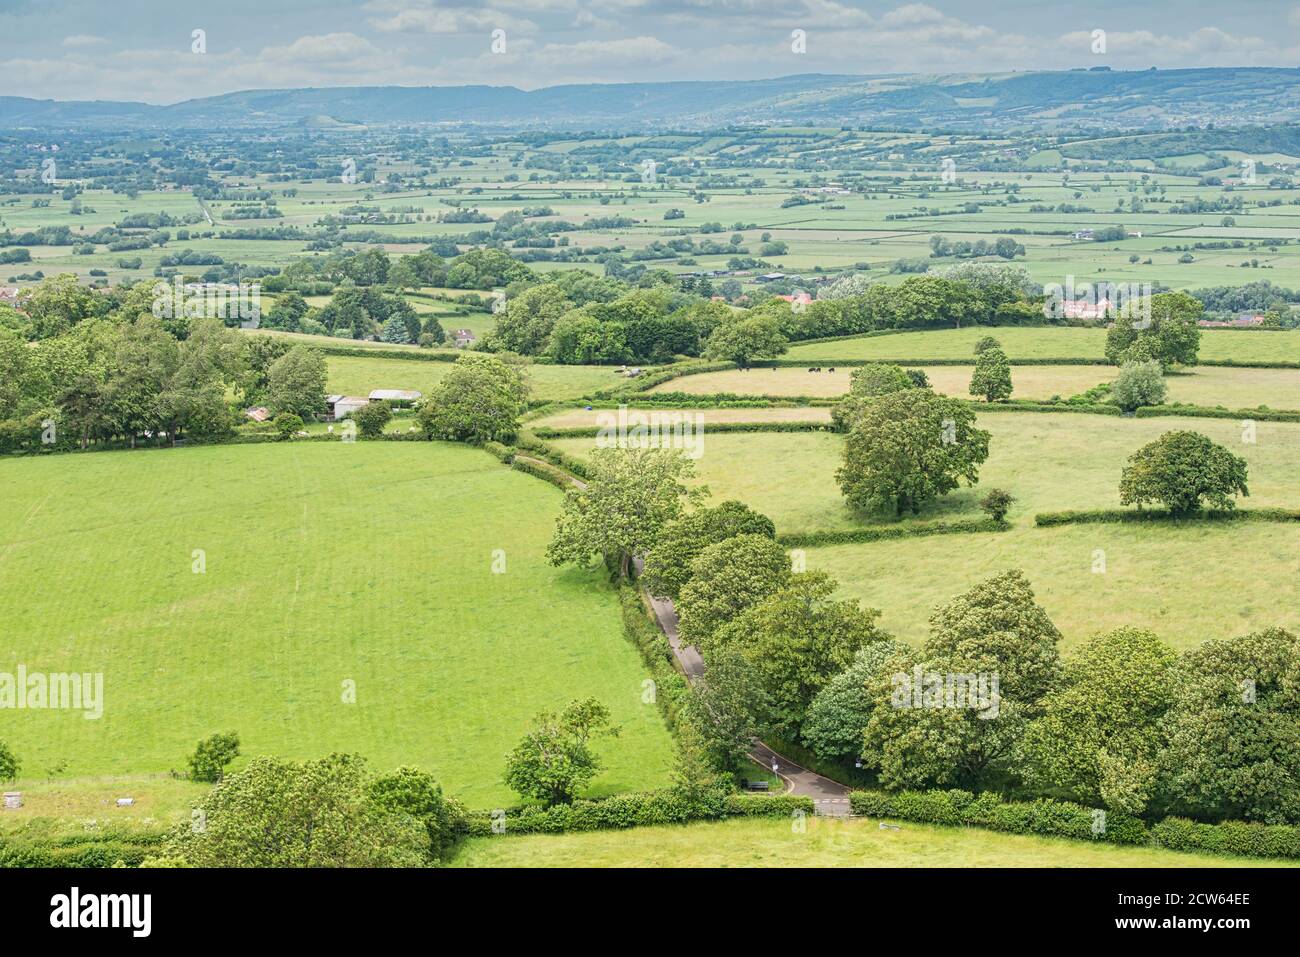 View from the top of Glastonbury Tor, overlooking enclosed farmland and cow pastures. Rural Glastonbury, cows and rough country roads. Stock Photo